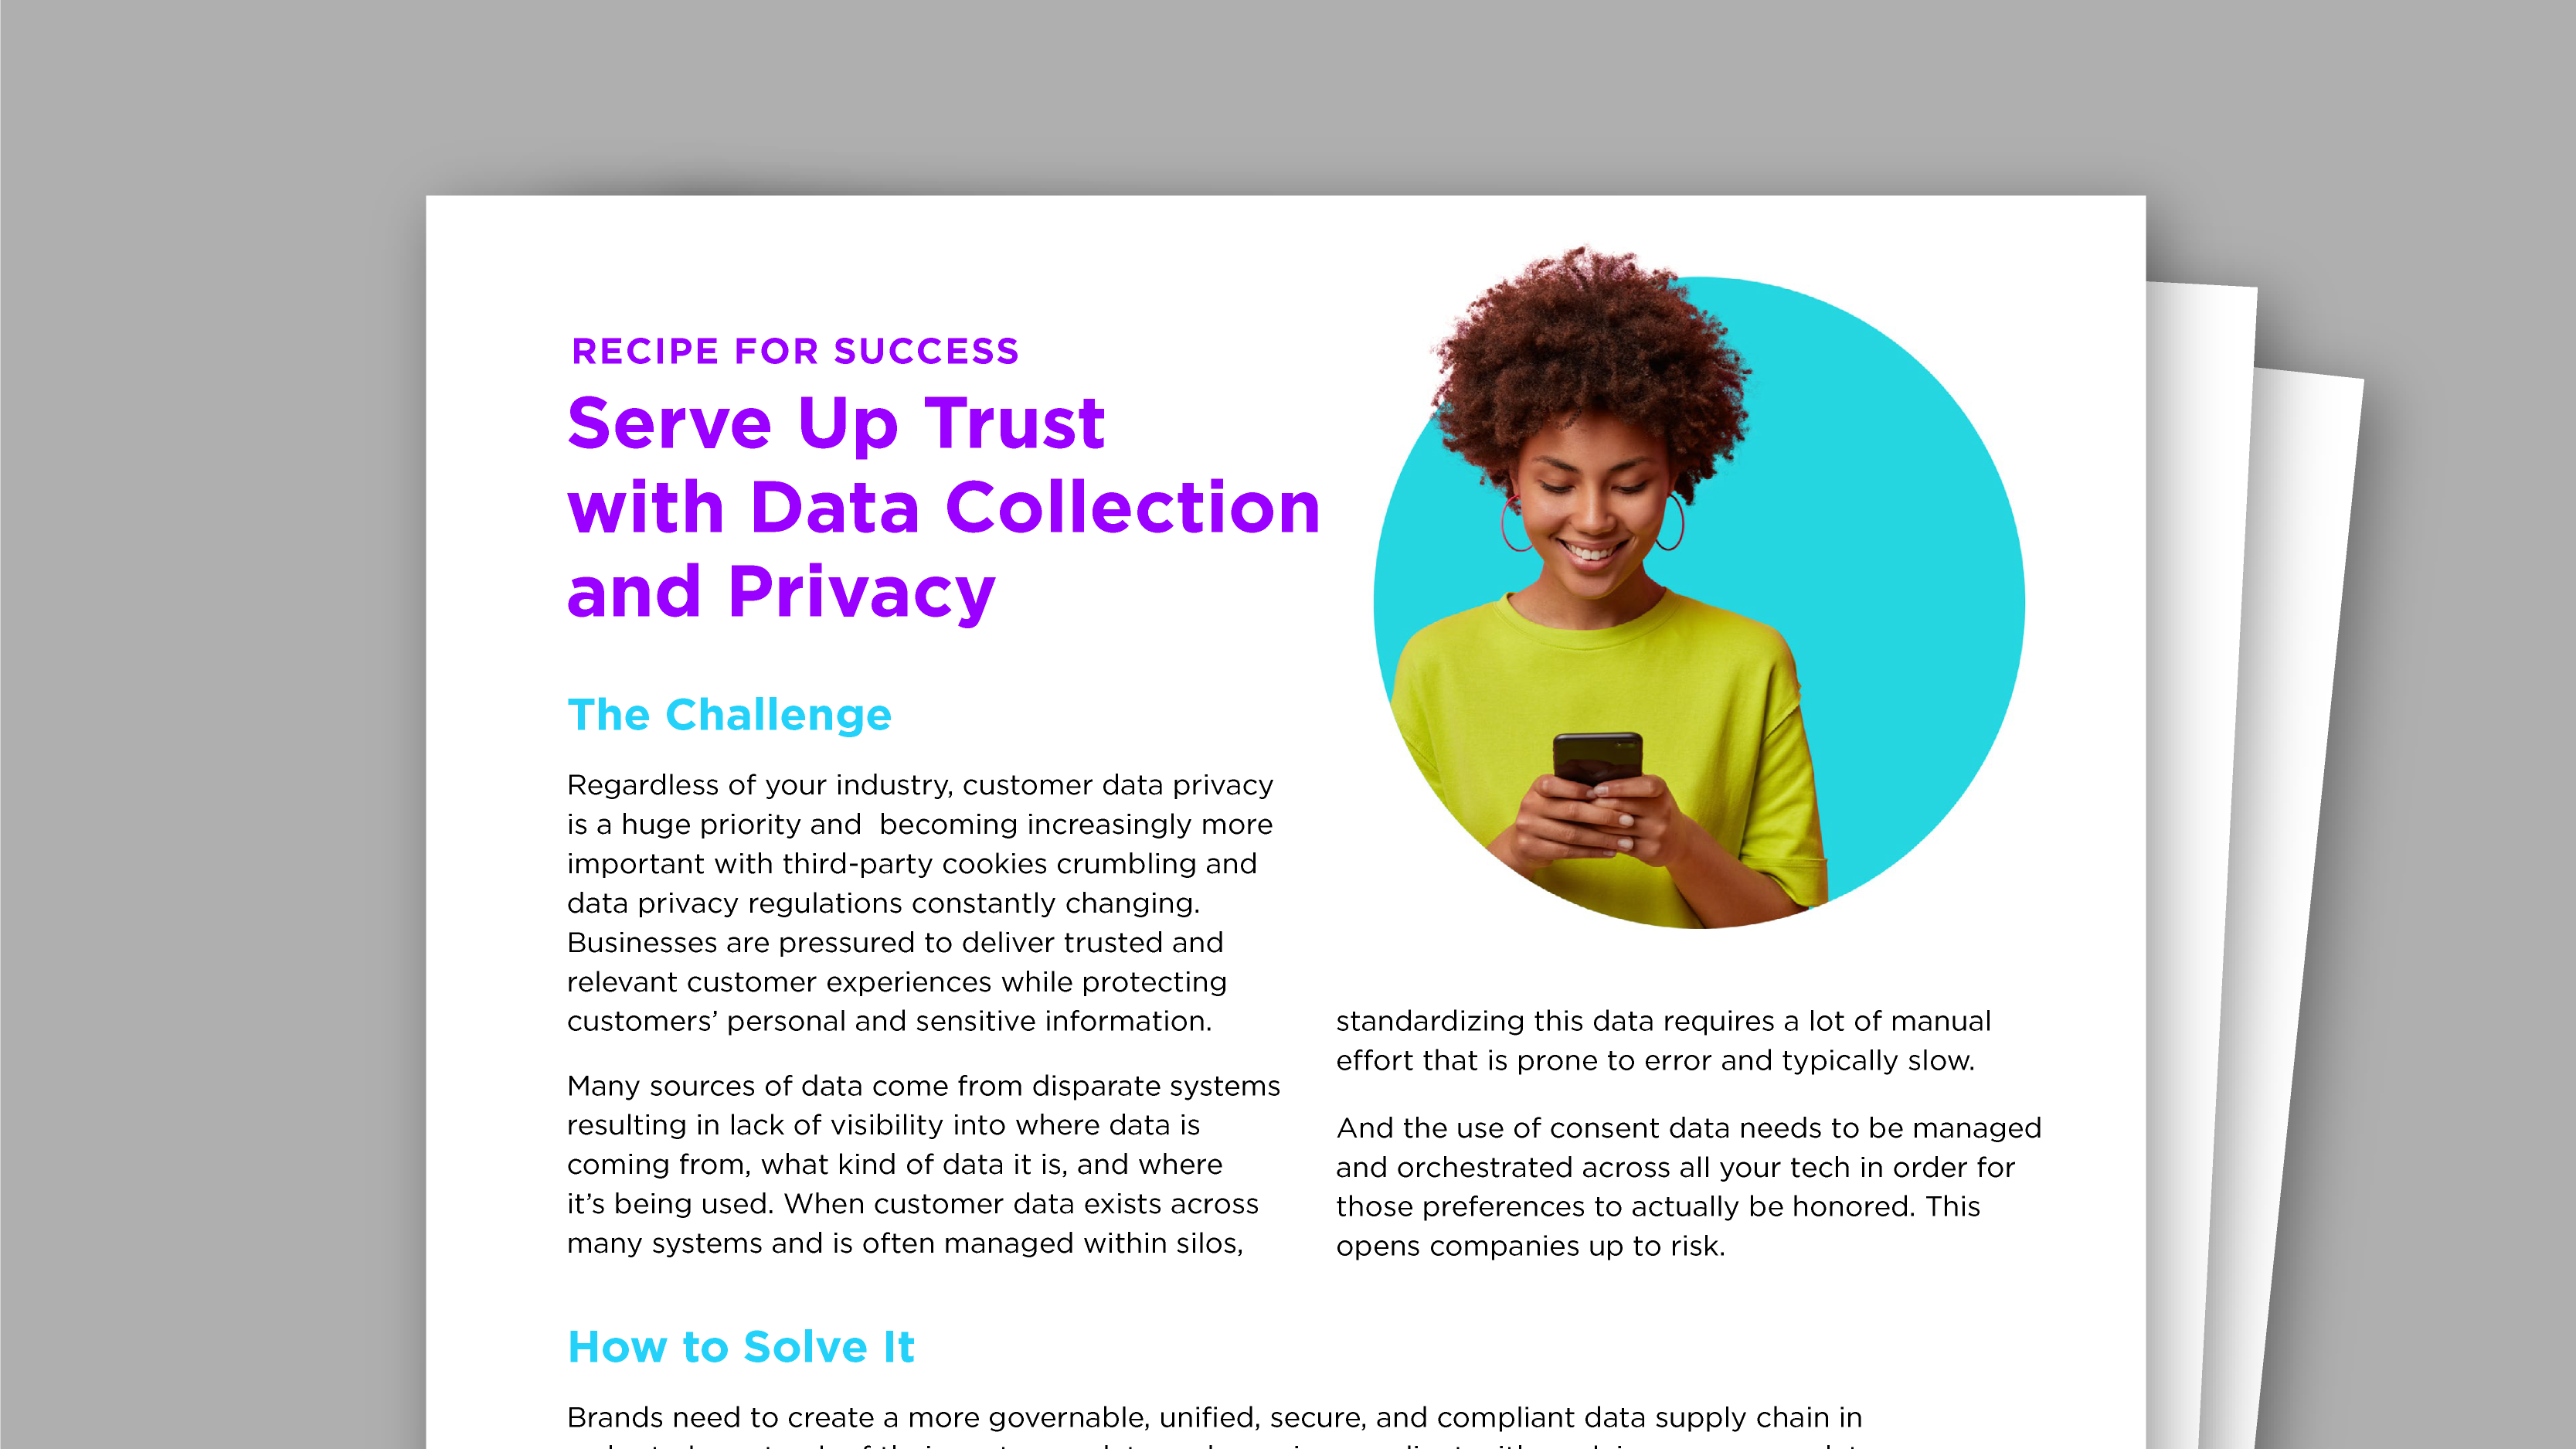 Serve Up Trust with Data Collection and Privacy